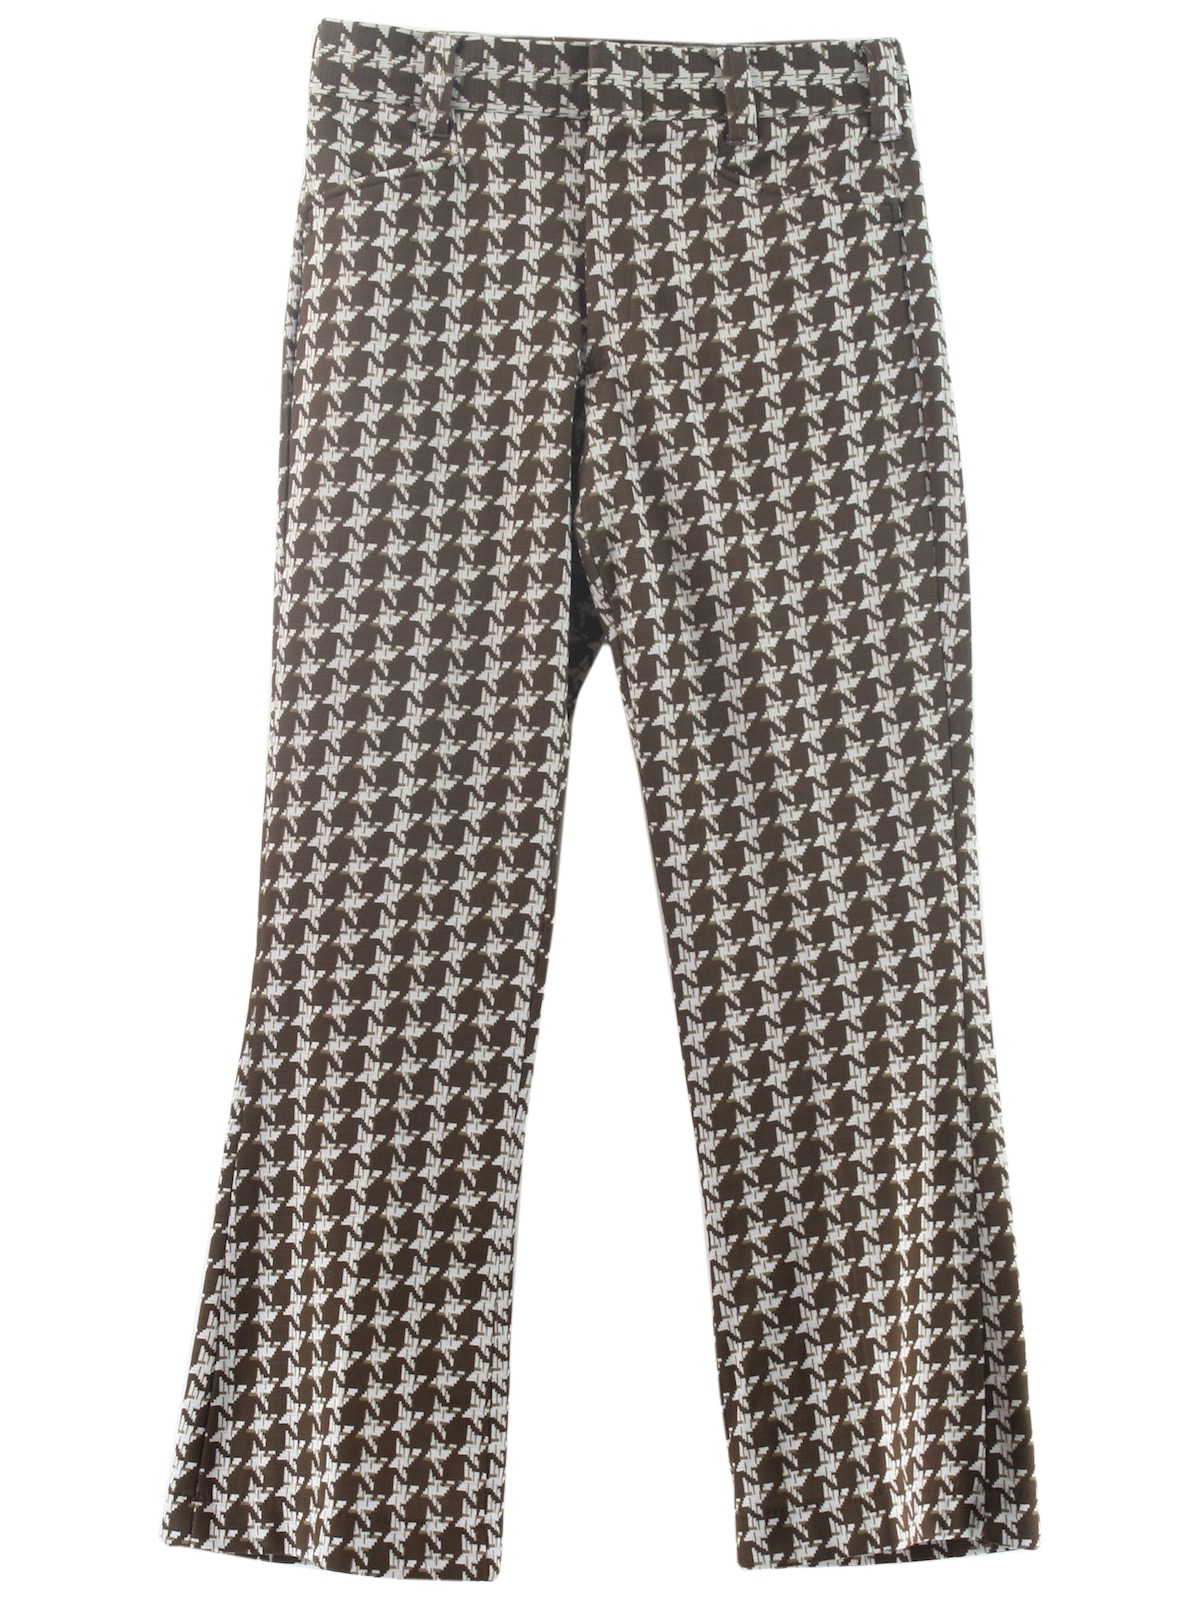 70's Cavalier Flared Pants / Flares: 70s -Cavalier- Mens brown, tan and ...